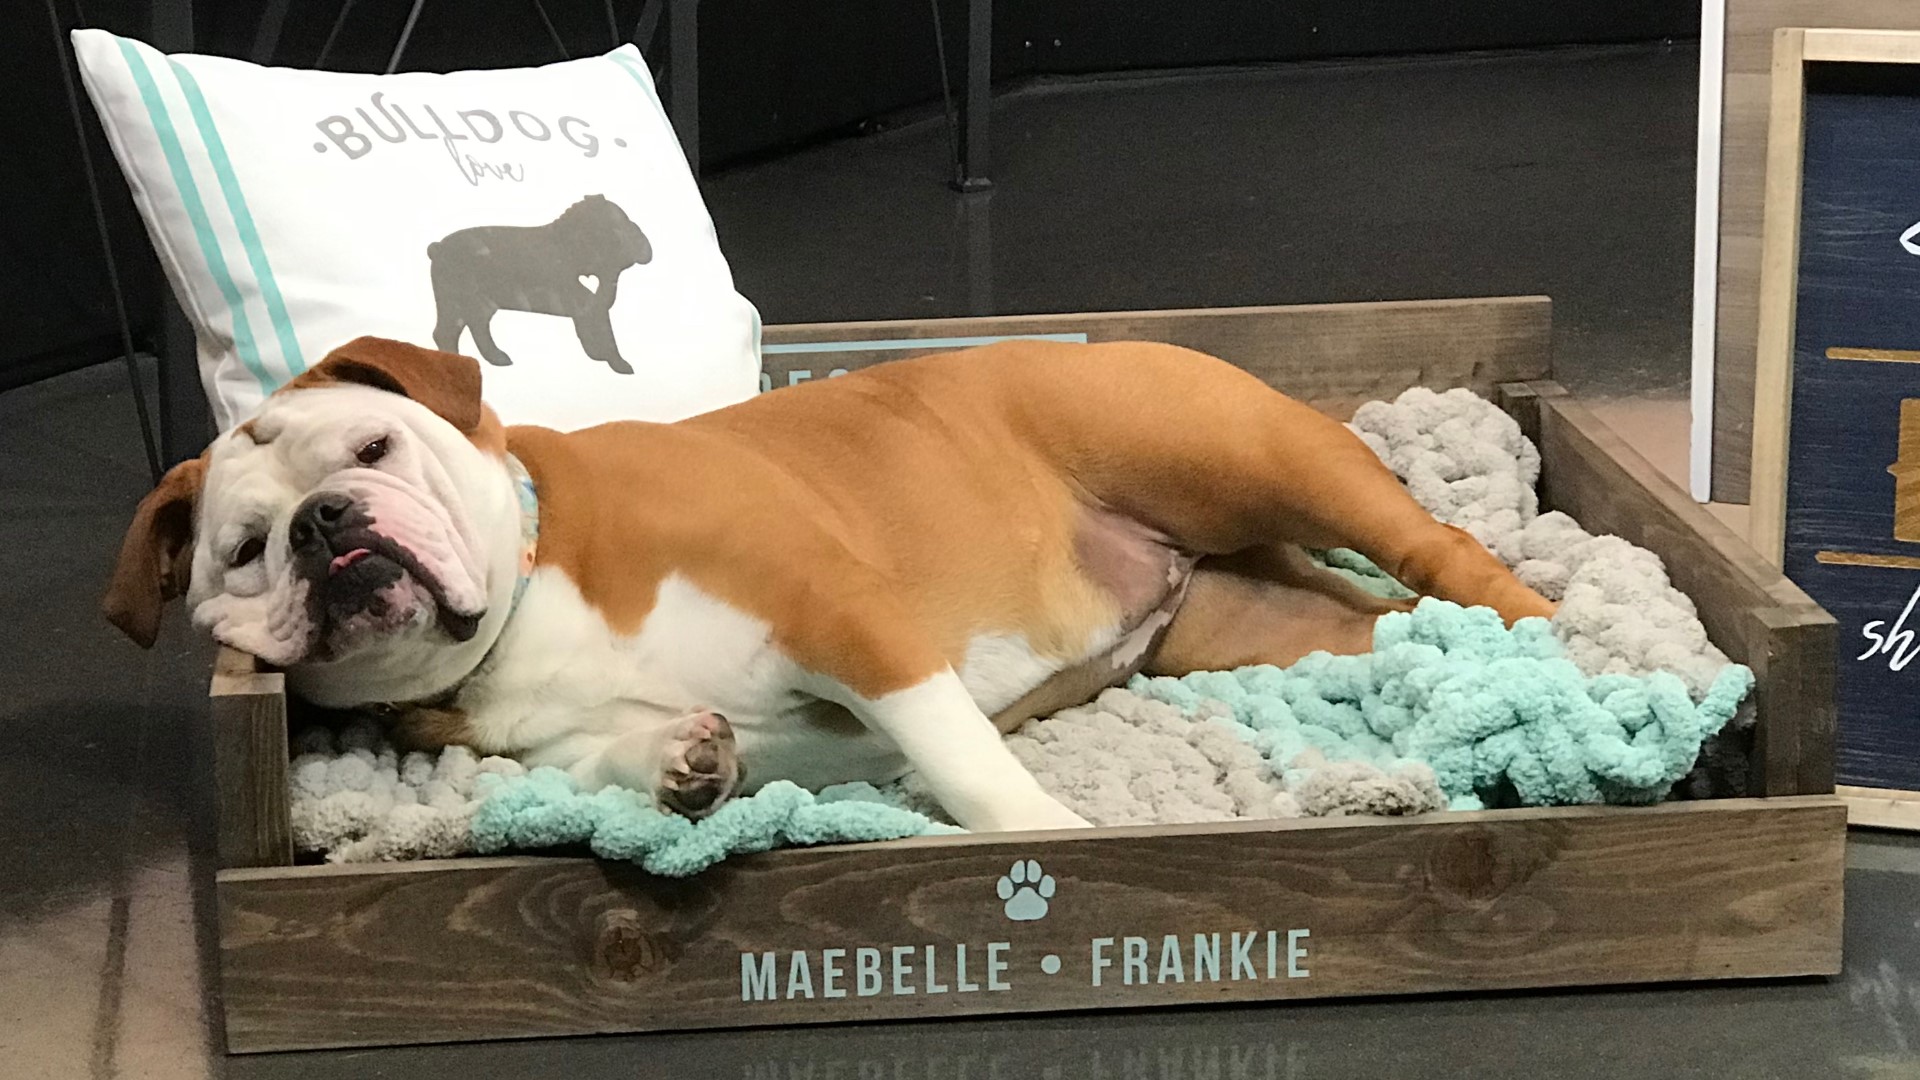 AR Workshop Seattle gives us an easy to follow step by step guide on how to make a dog bed with wood, paint, and a nail gun.